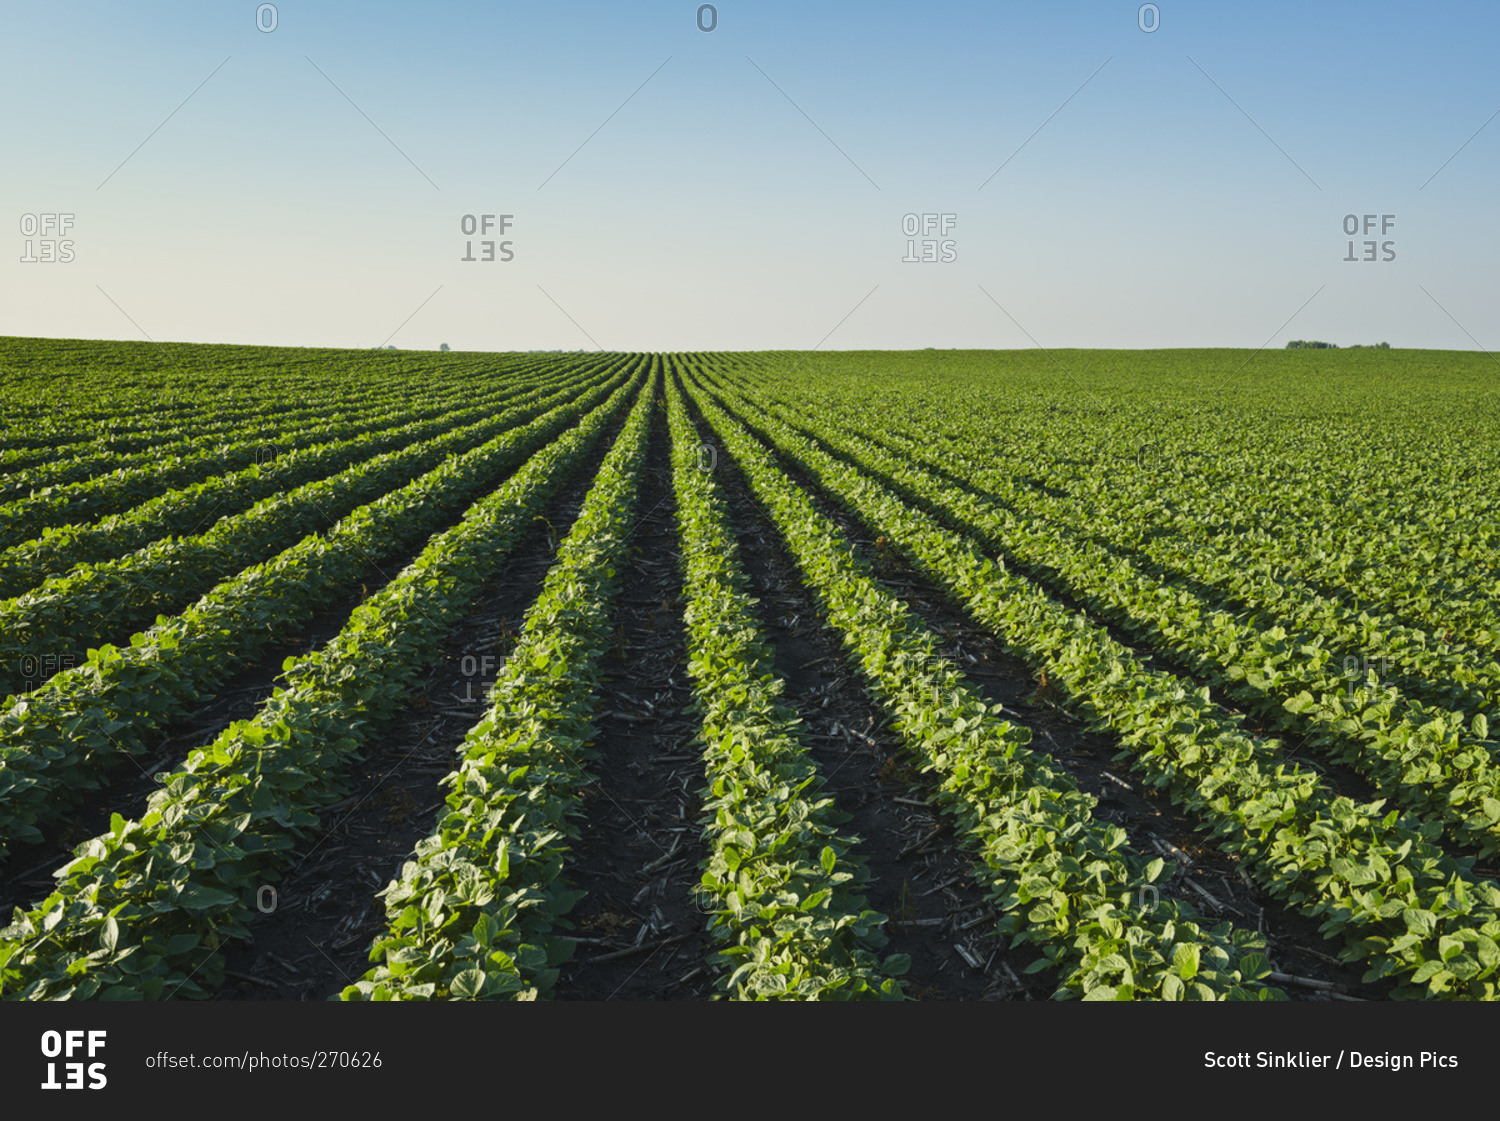 A healthy green mid-season soybean field two weeks after being sprayed with herbicide in central Iowa, dead broadleaf weeds can be seen in between the rows, Iowa, United States of America